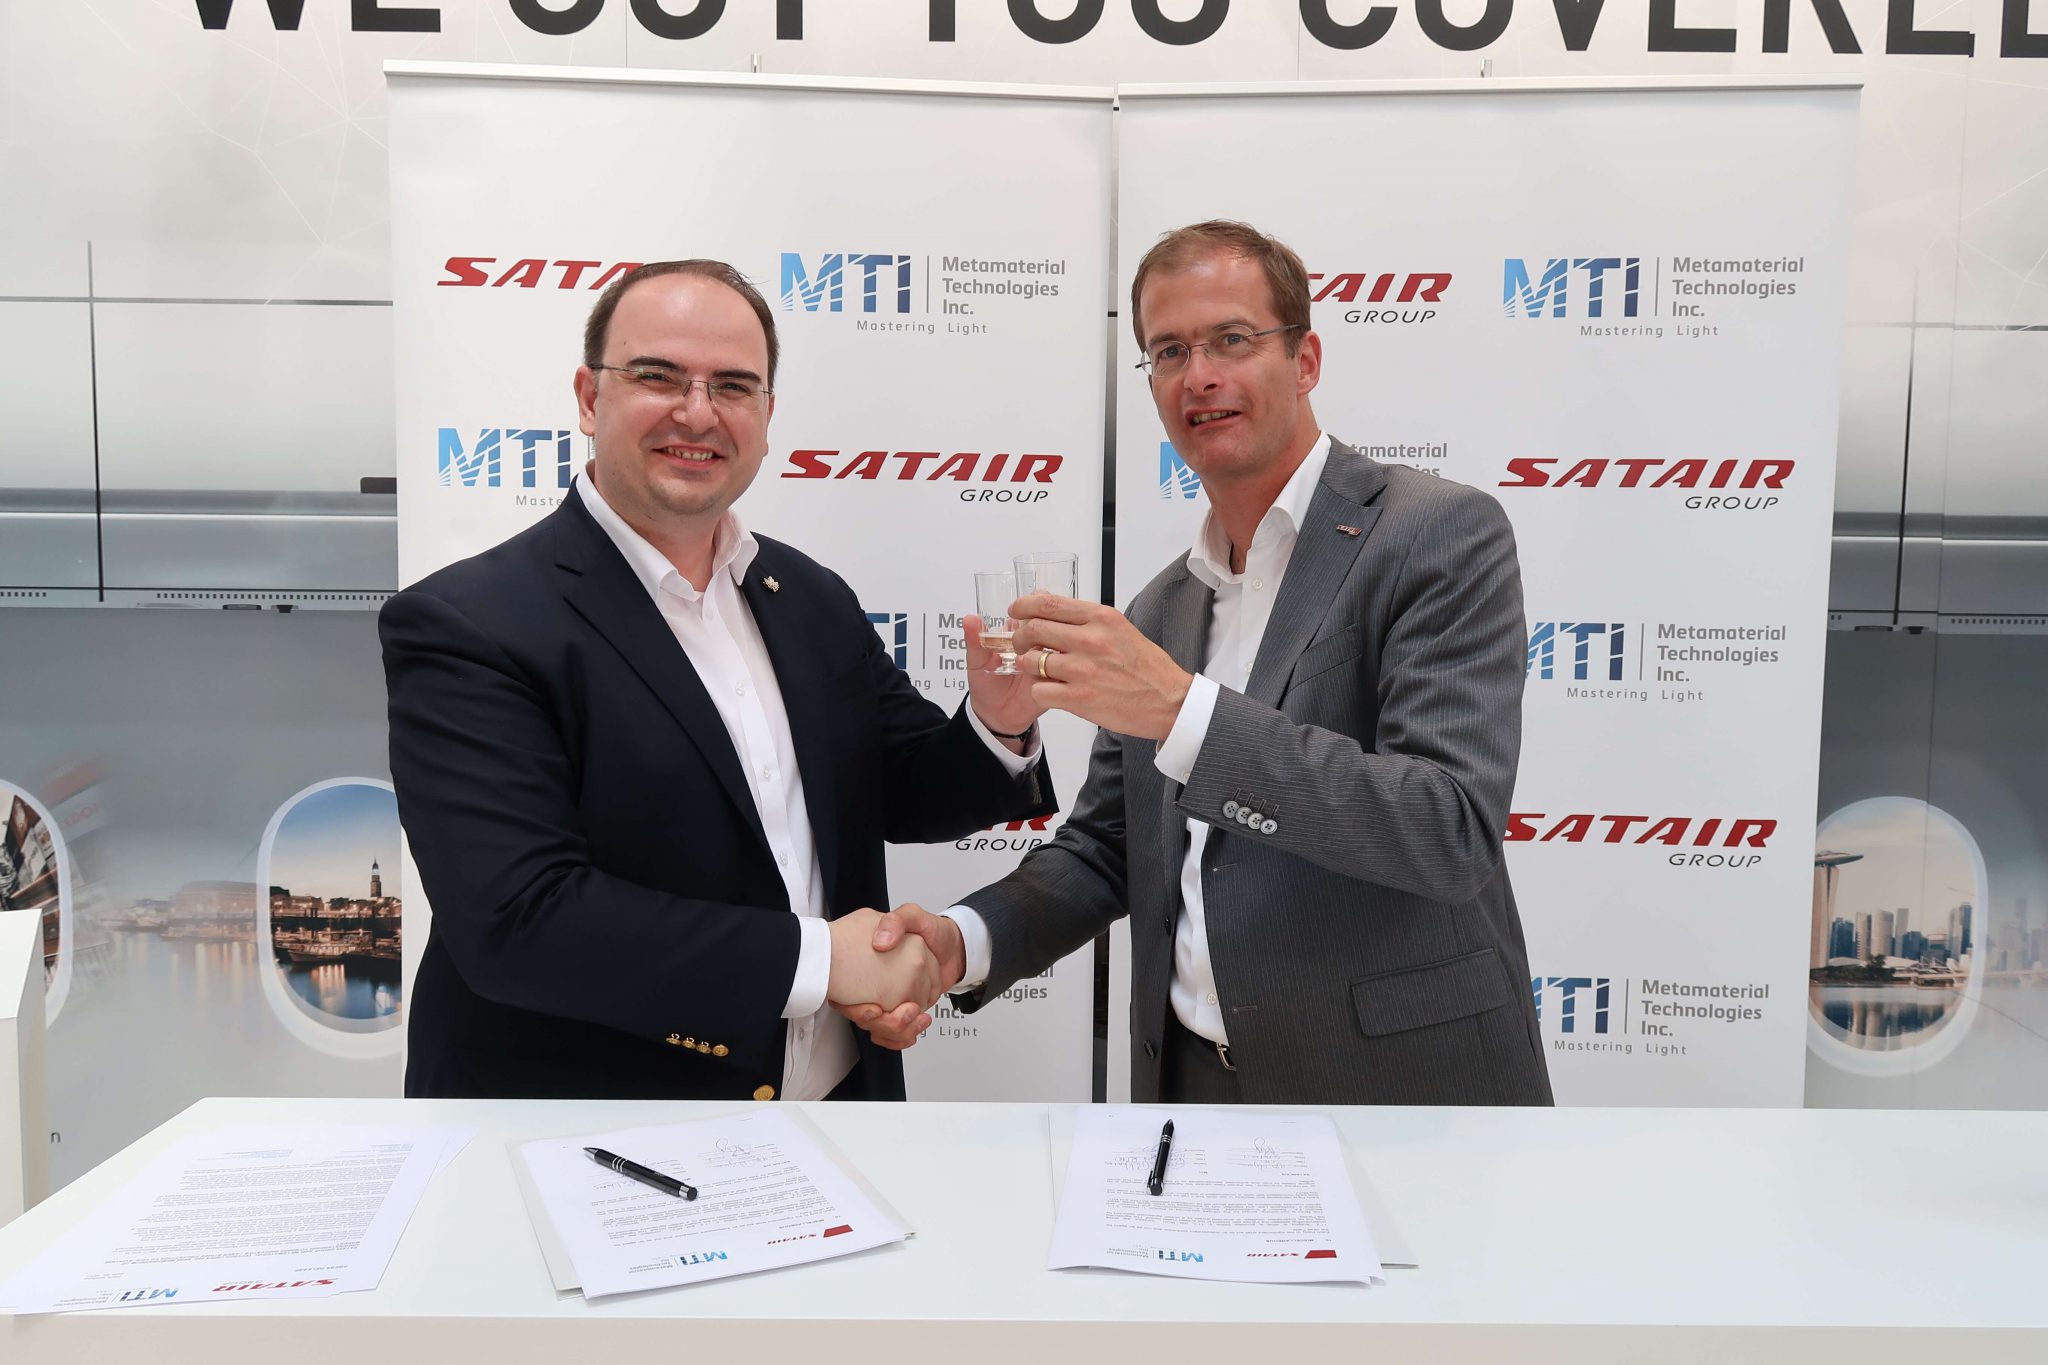 Satair Group and Metamaterial Technologies sign MOU to bring innovative laser strike protection to civil aviation market